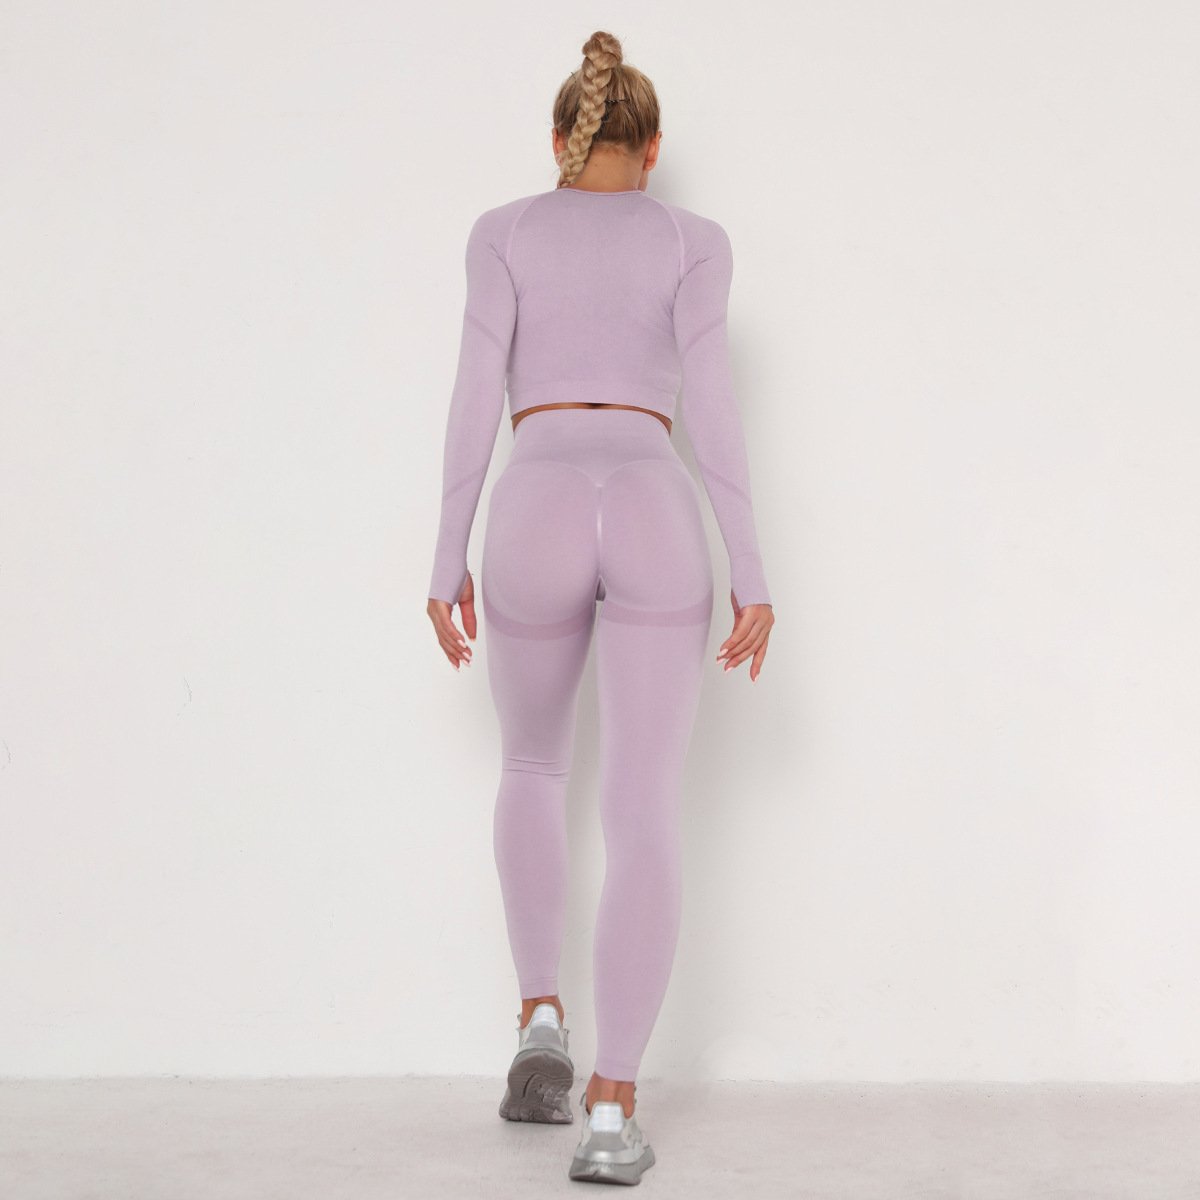 Women Seamless Gym set Fitness Sports Suits GYM Cloth Long Sleeve Shirts High Waist Running Sexy Booty Leggings Workout Pants